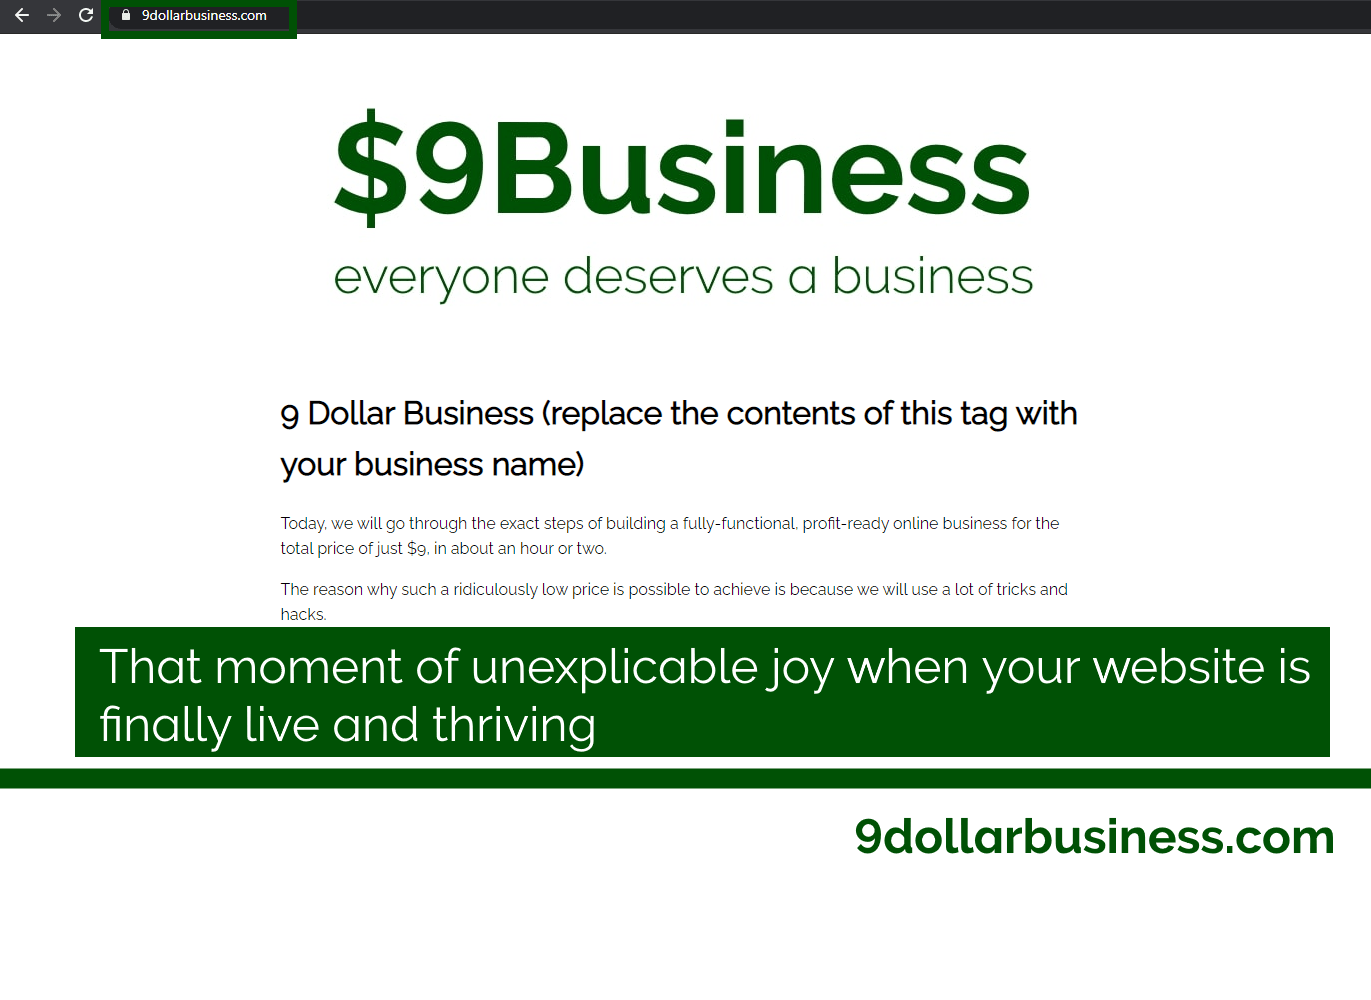 When your business goes live - 9 dollar business